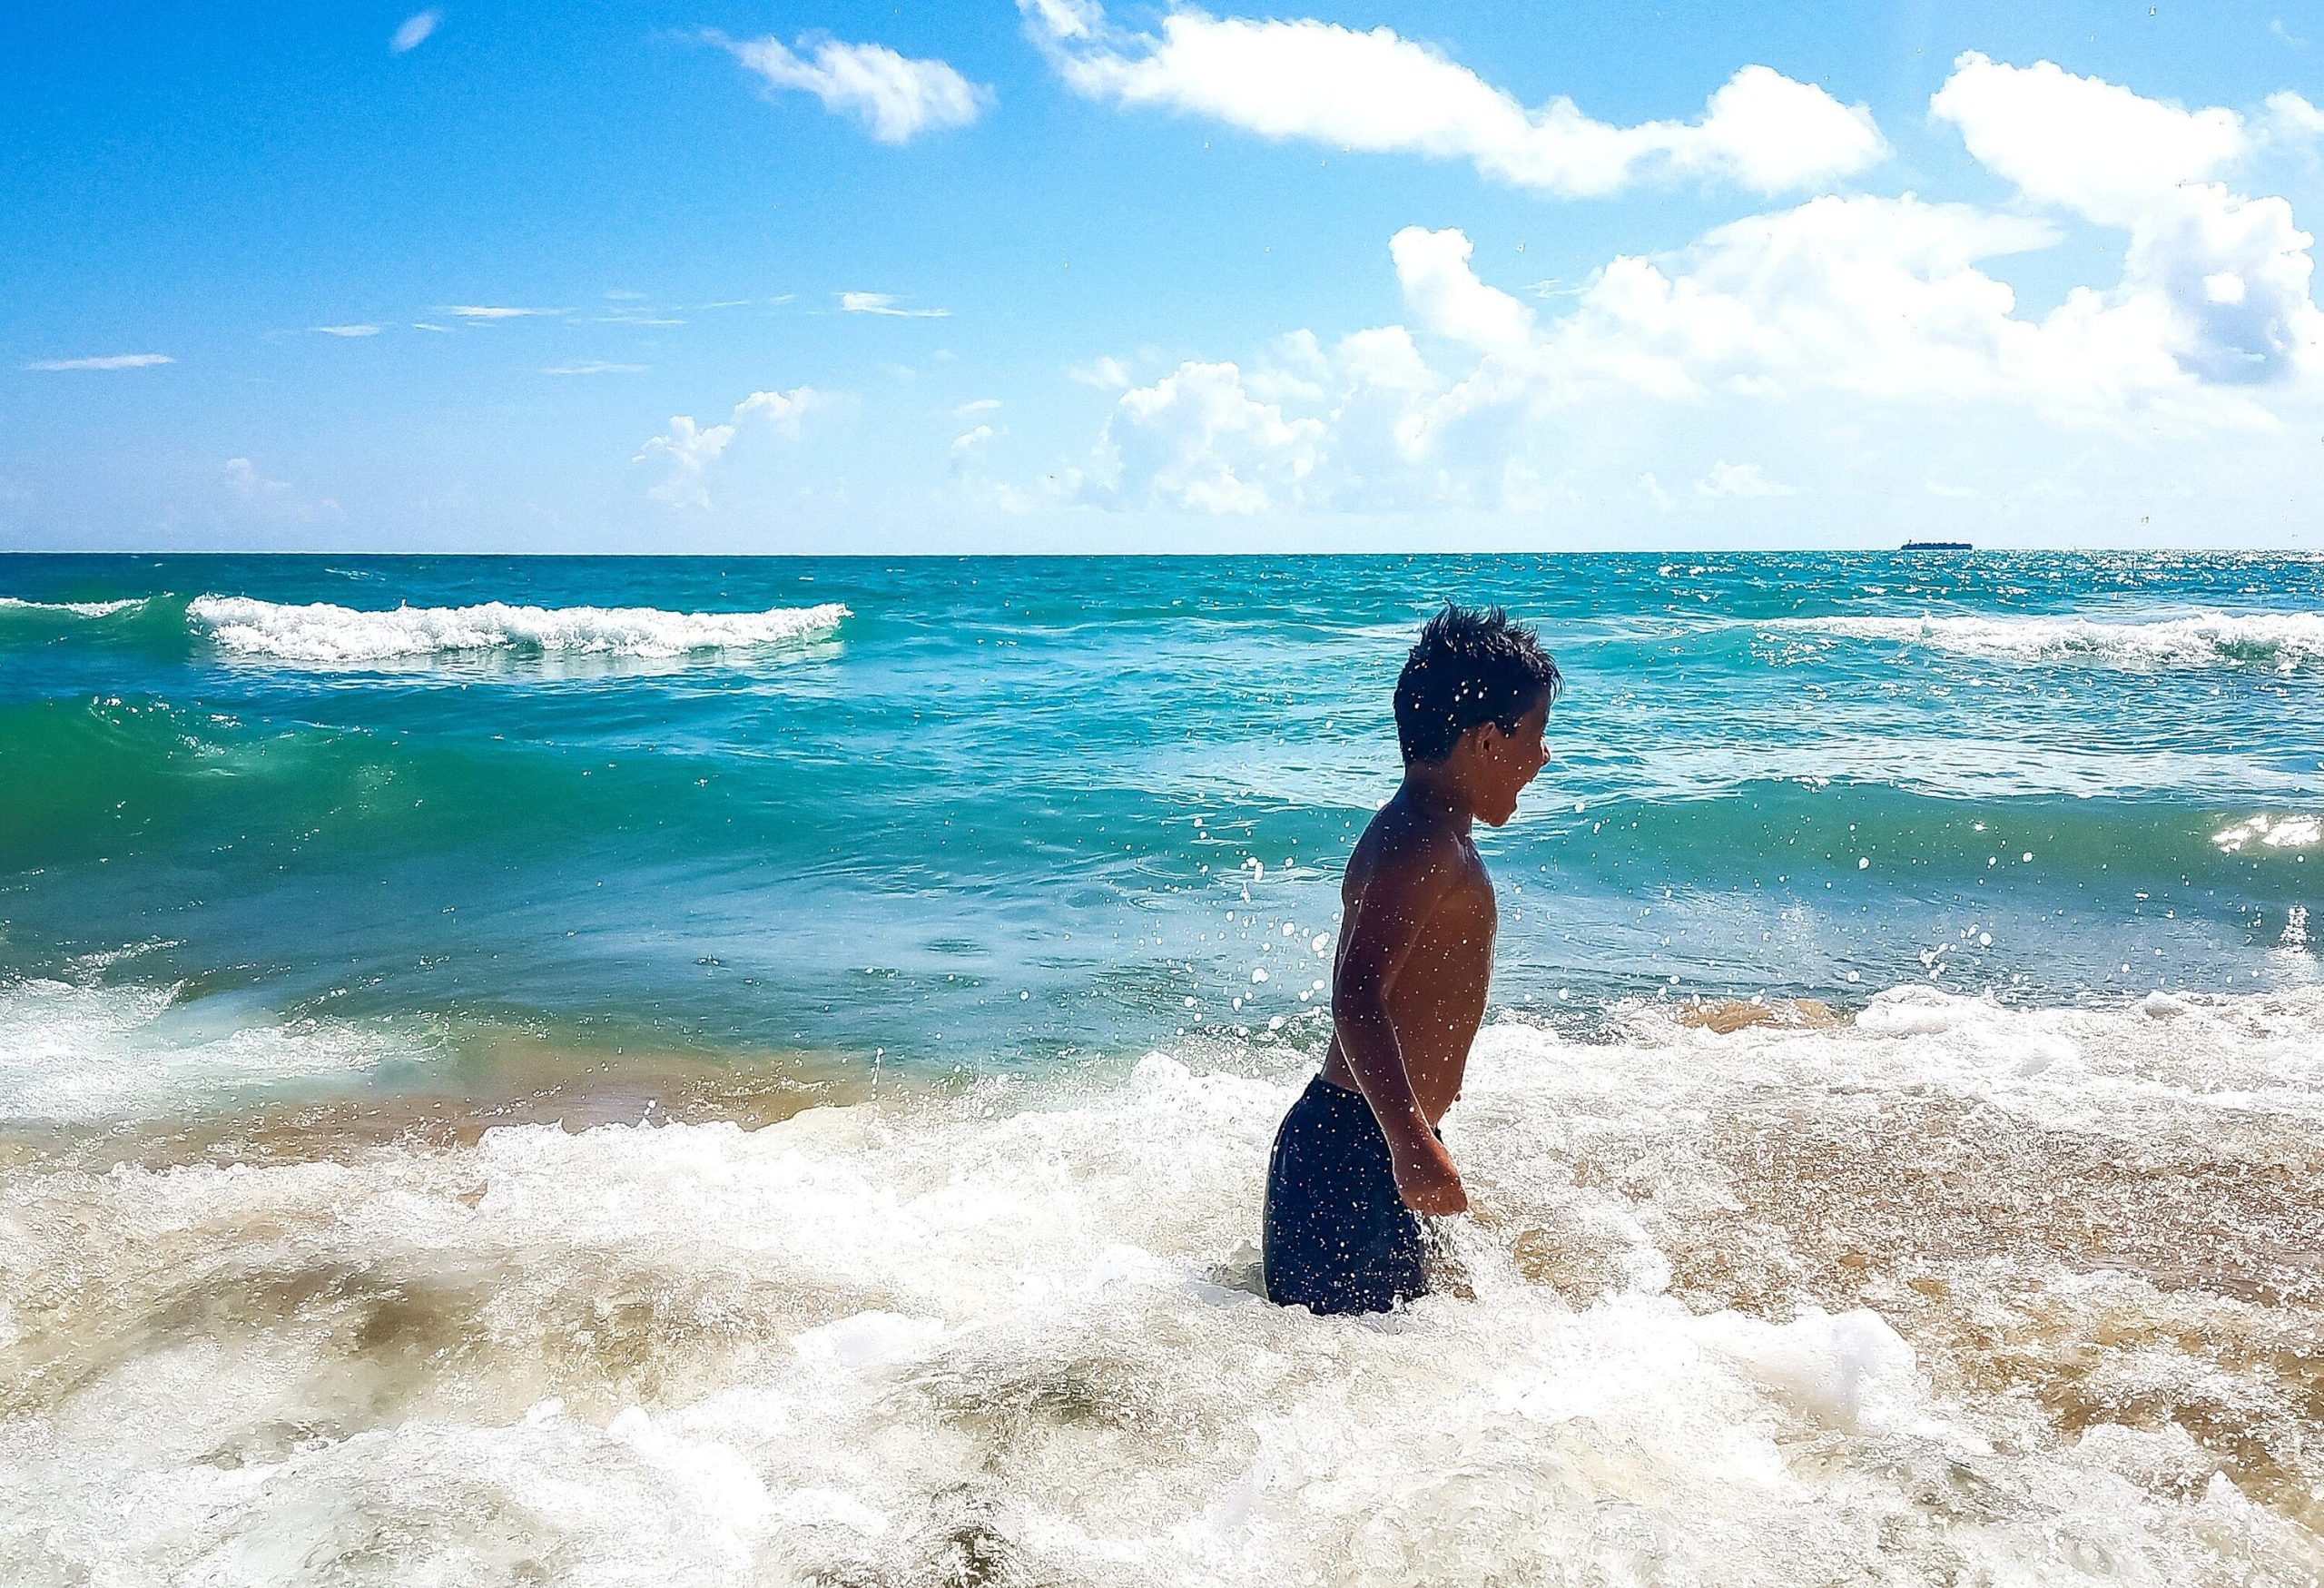 A young child stands on the shore as waves crash around them.